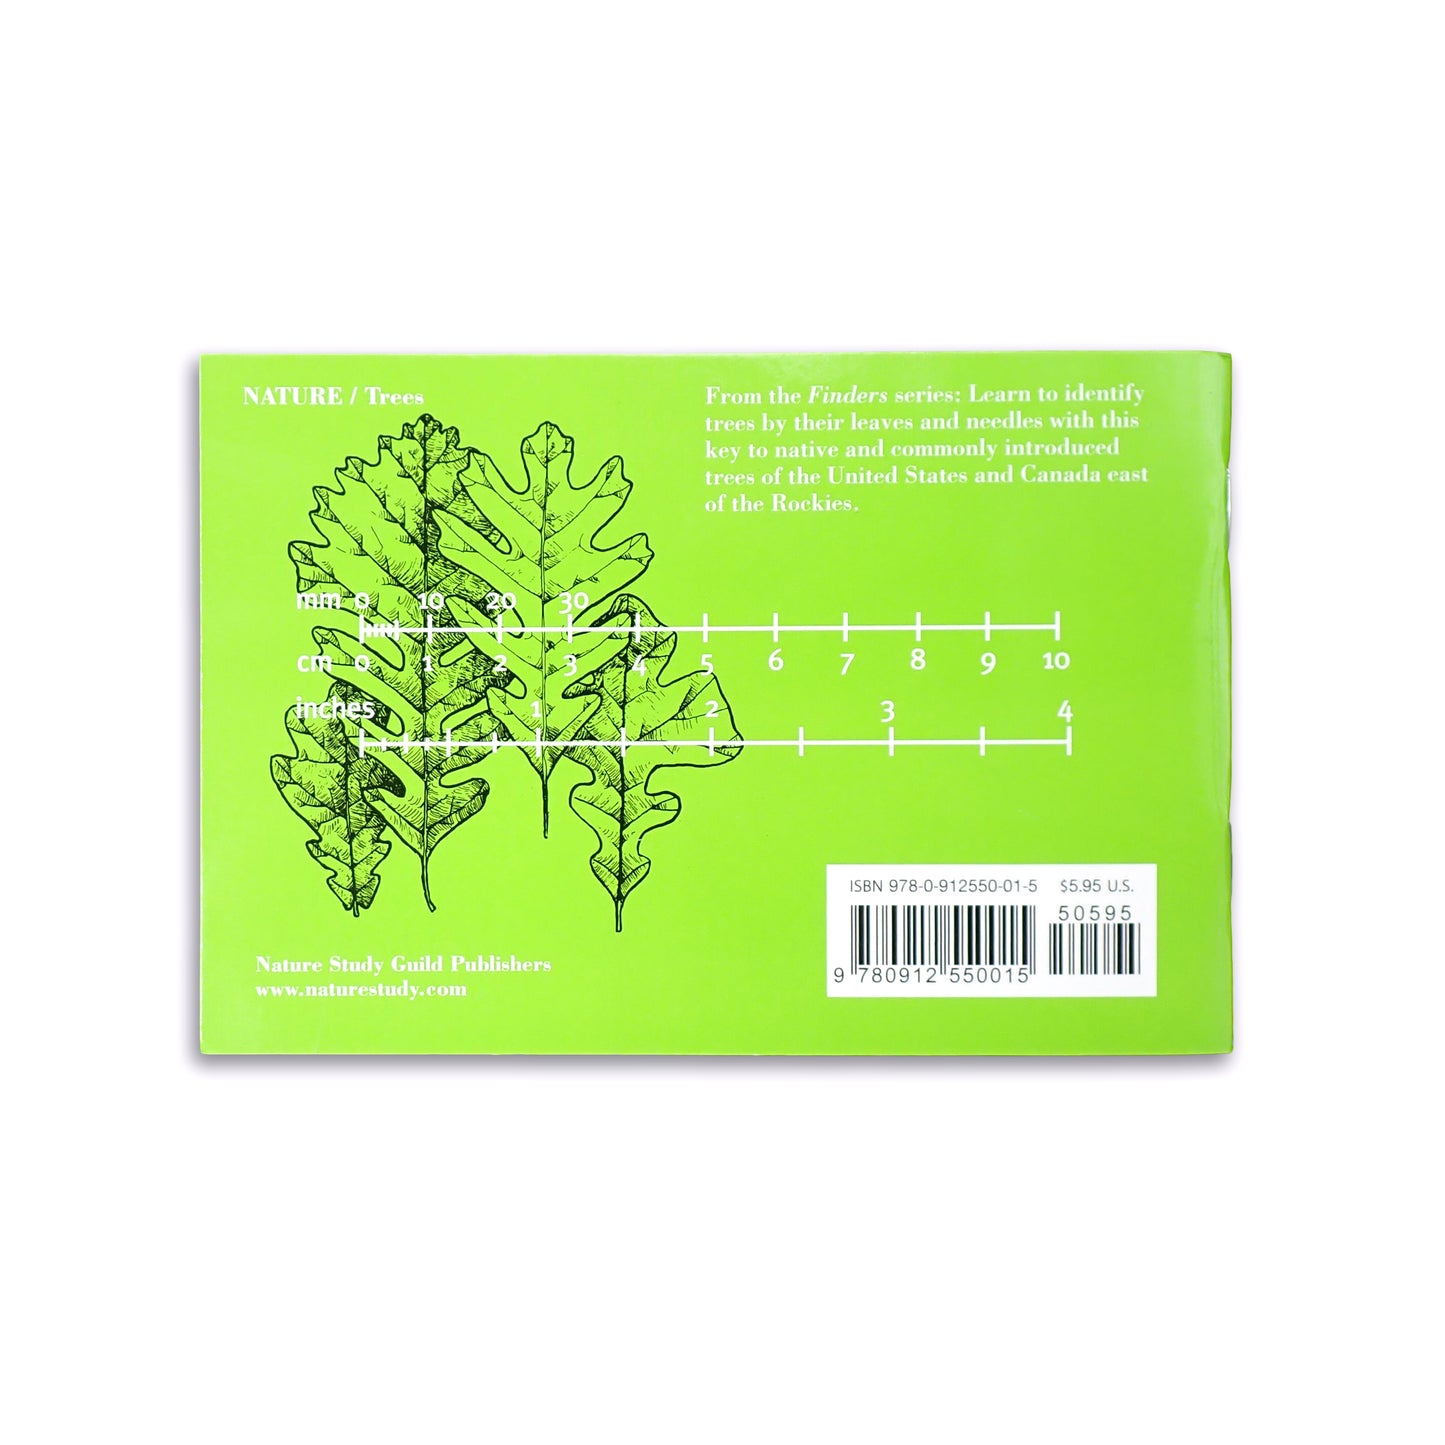 Tree Finder: A Manual for the Identification of Trees by Their Leaves - May Theilgaard Watts